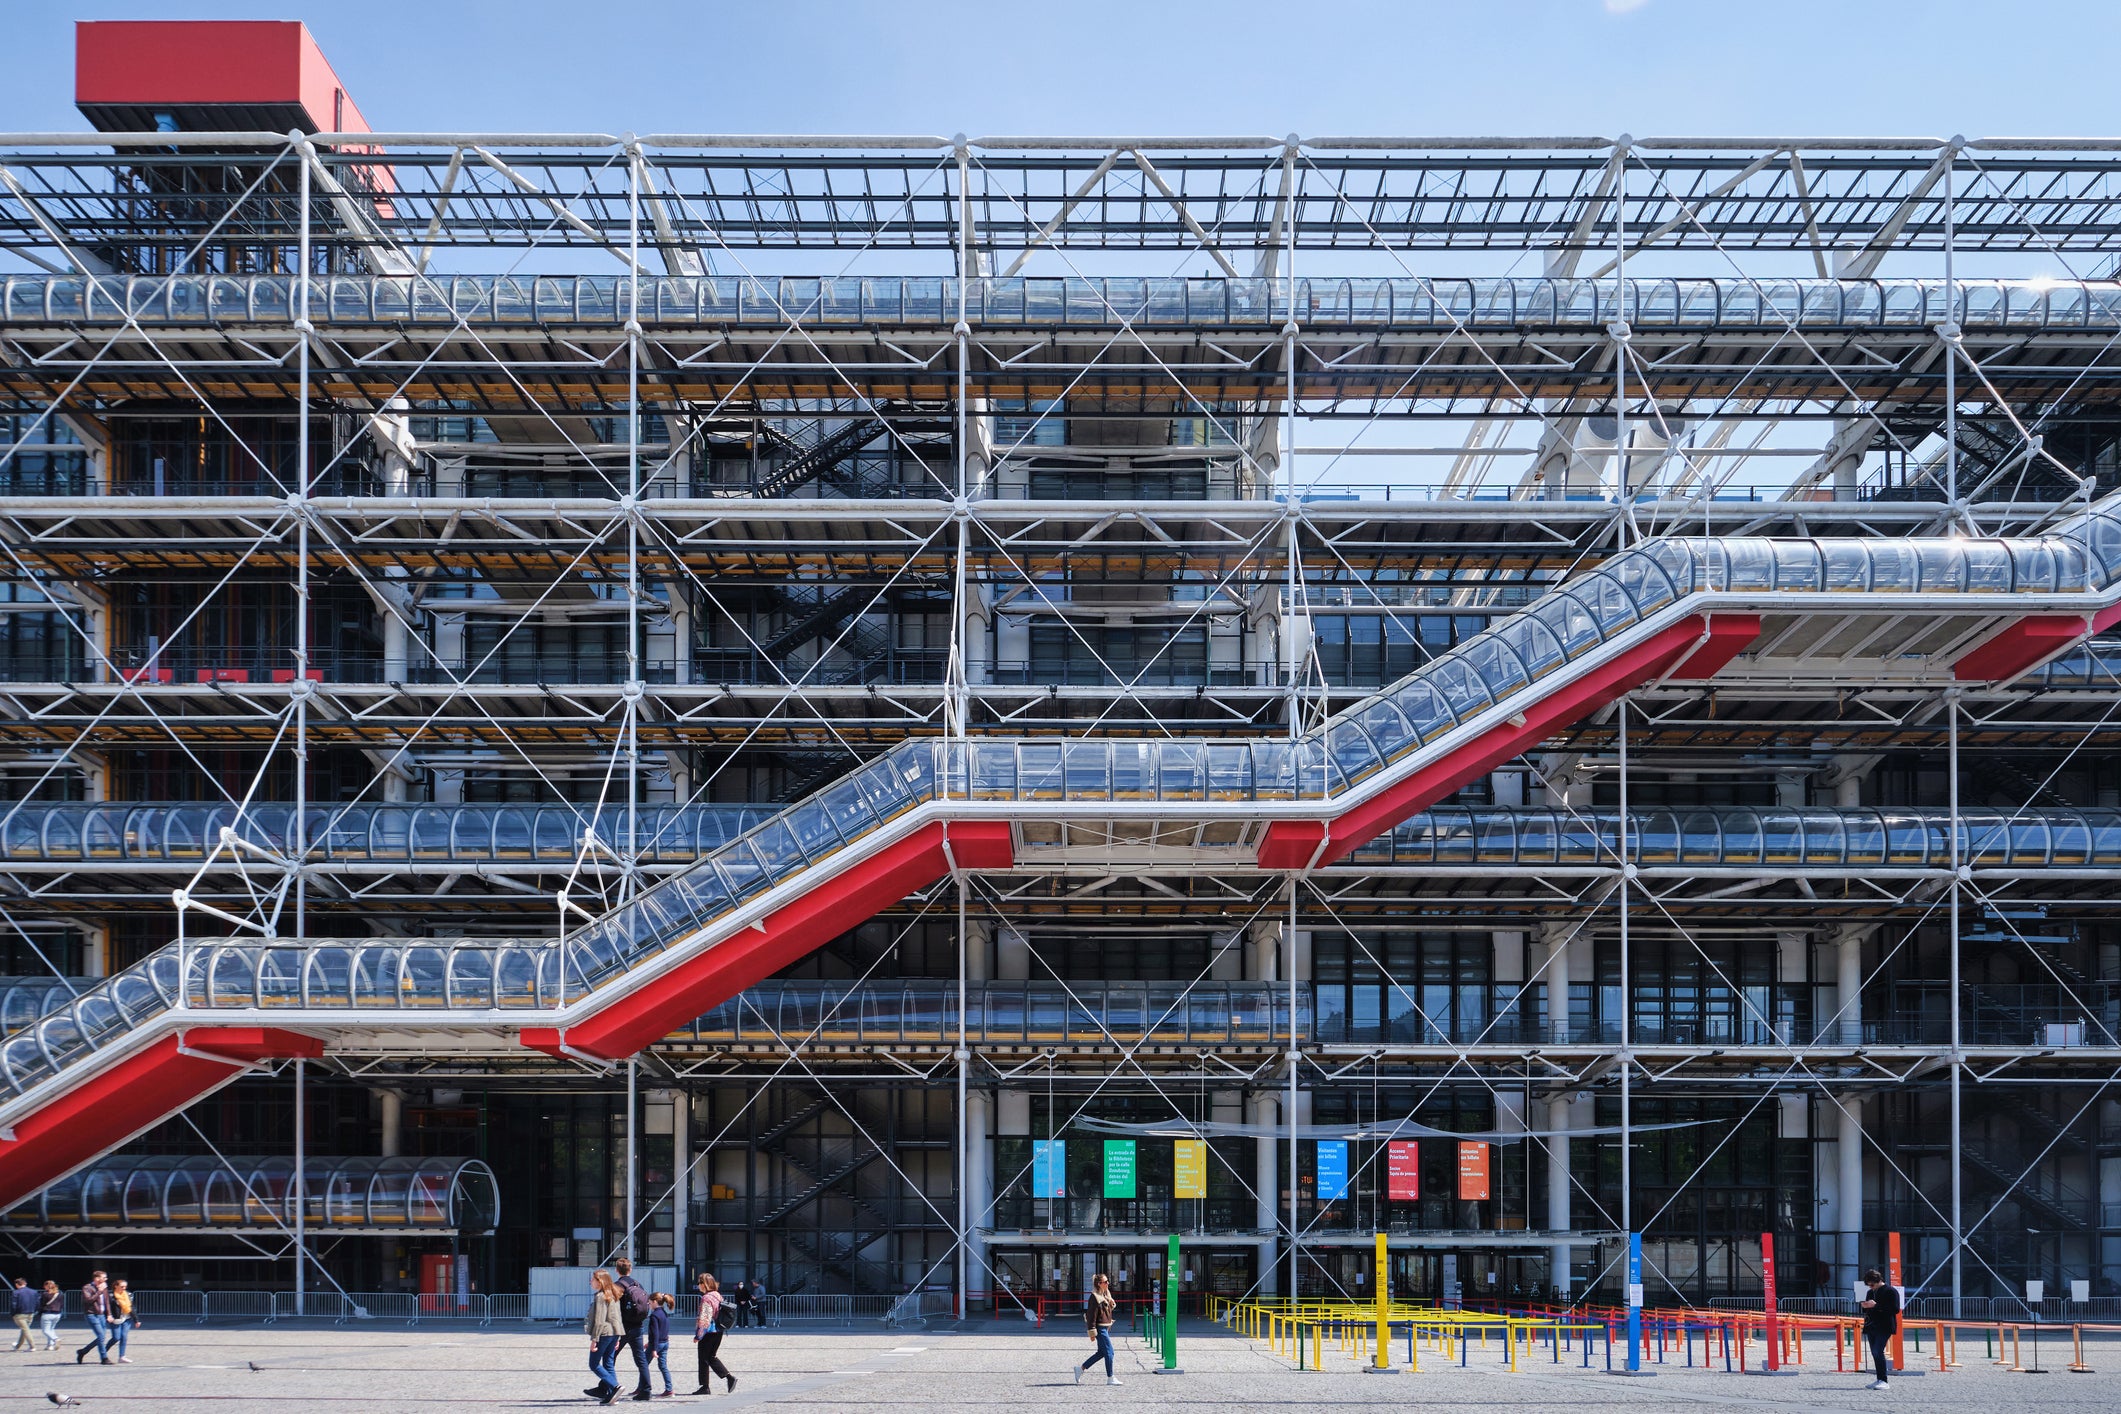 The outside of the Pompidou centre whets the appetite for the treasures inside